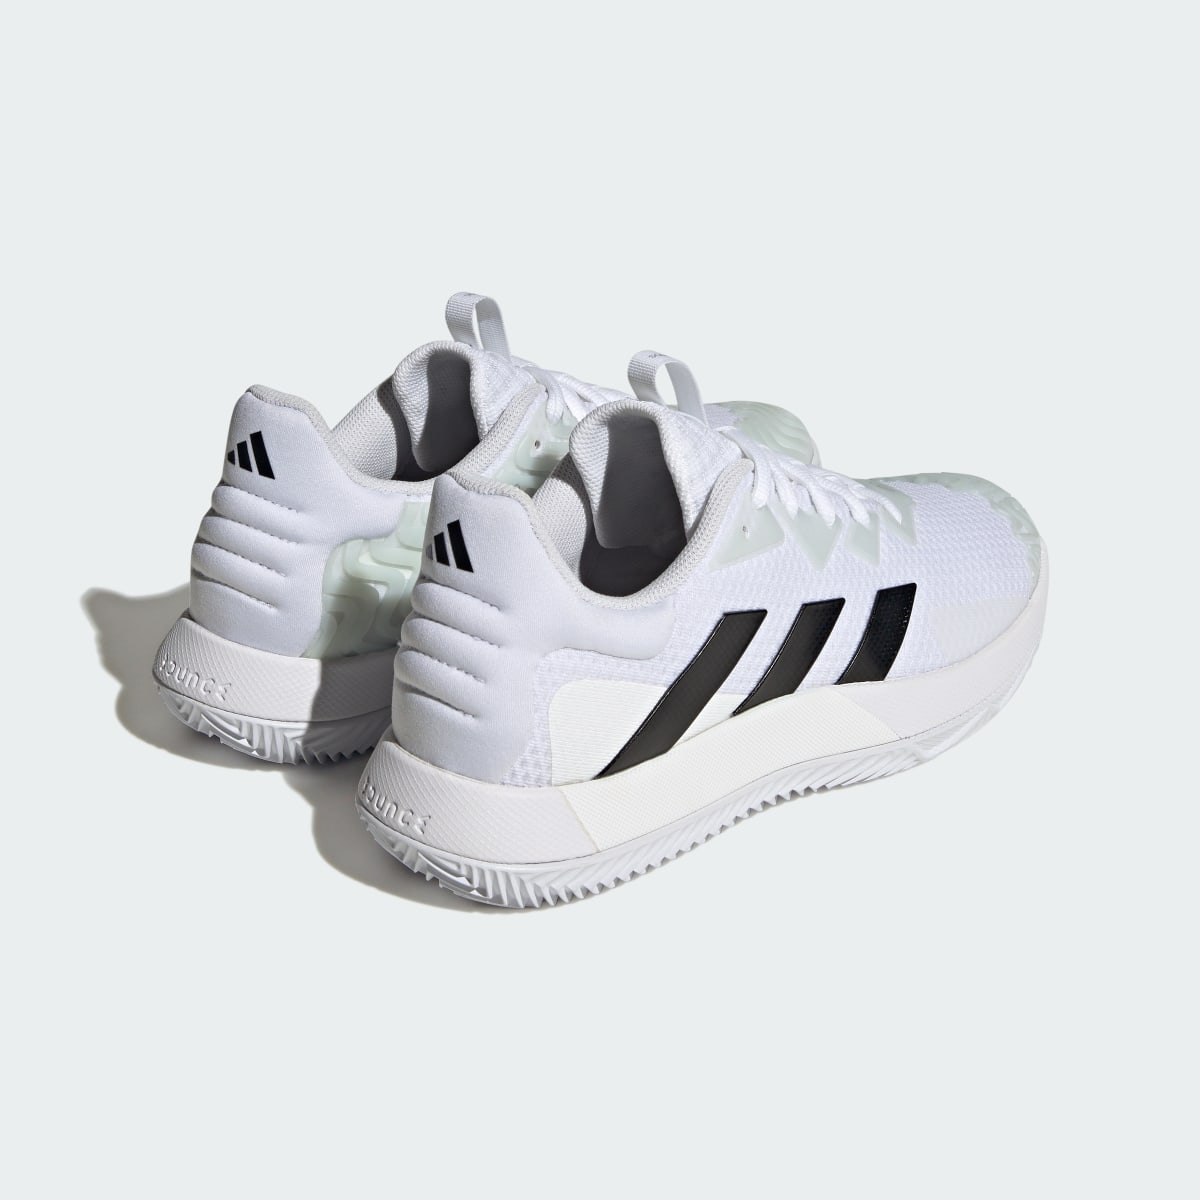 Adidas SoleMatch Control Clay Court Tennis Shoes. 6